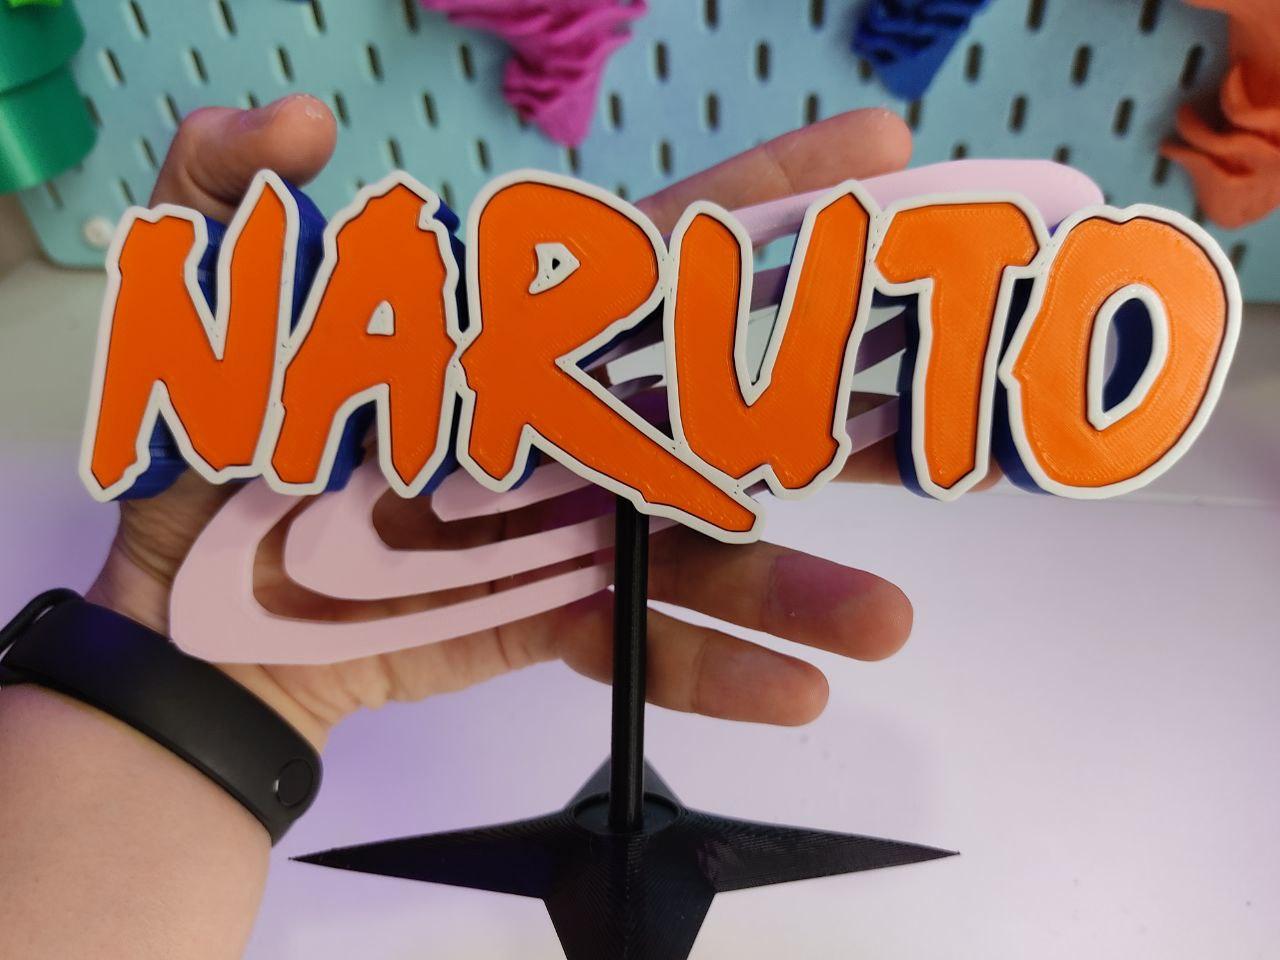 Naruto's logo stand 3d model